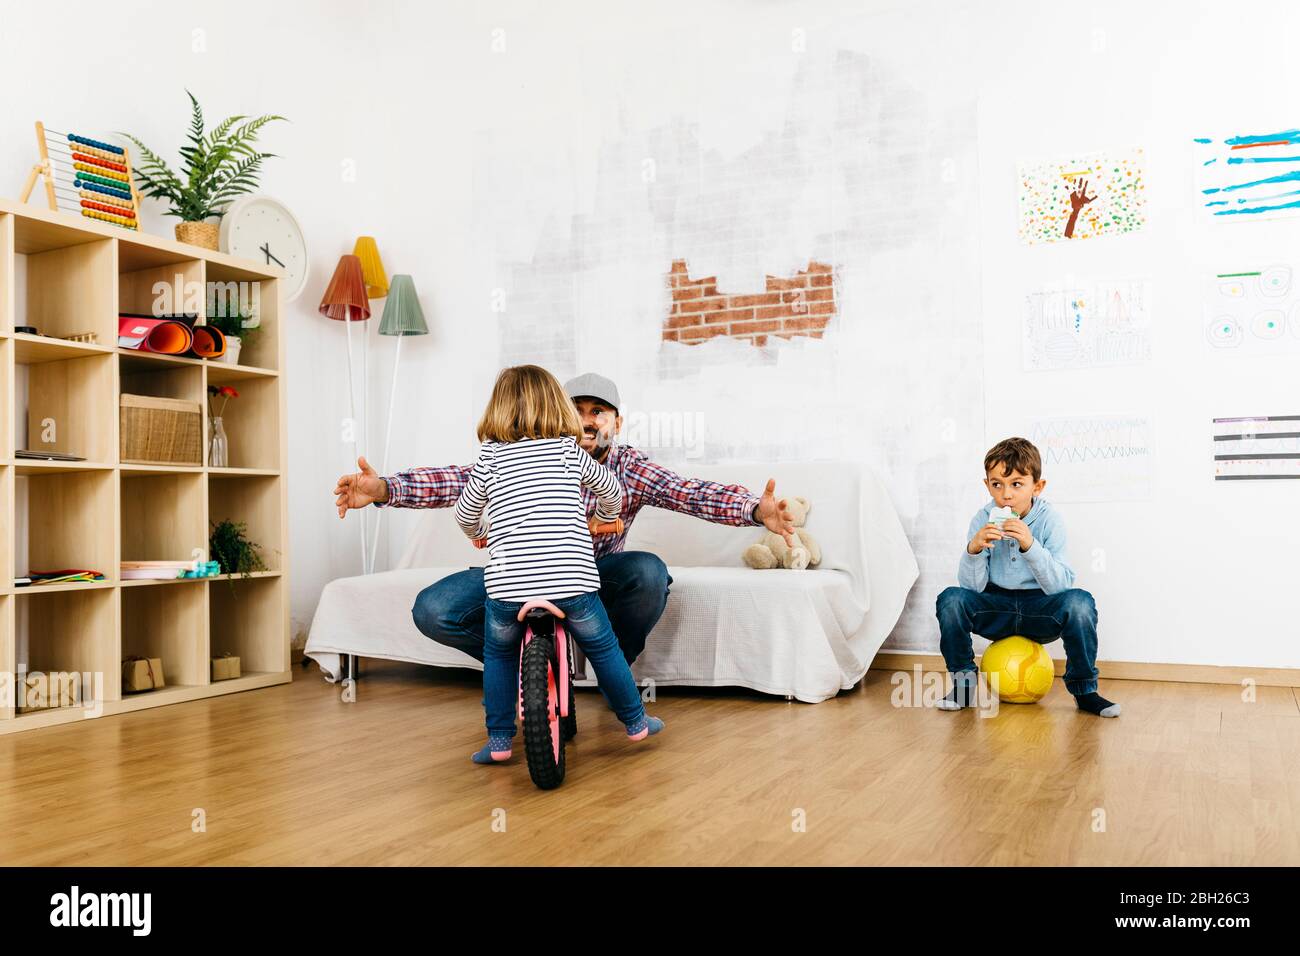 Father, daughter and son playing in the playroom, enjoying free time Stock Photo